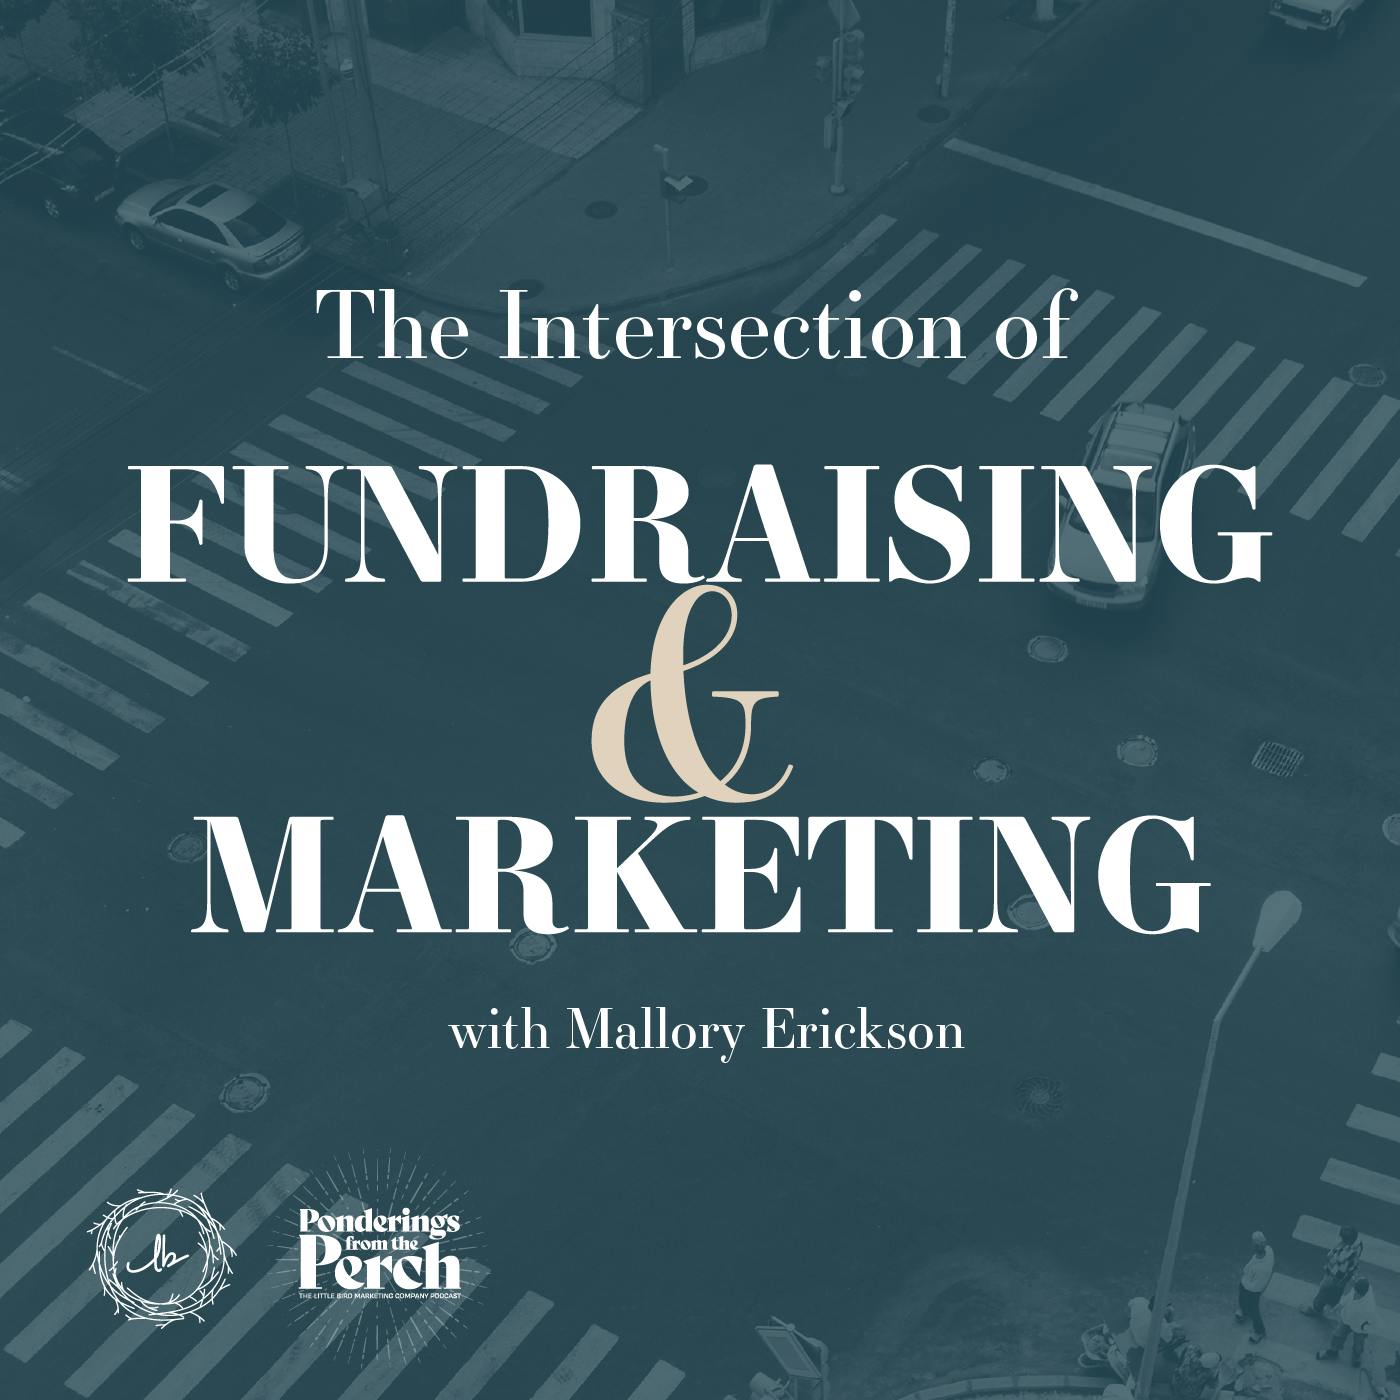 The Intersection of Fundraising and Marketing